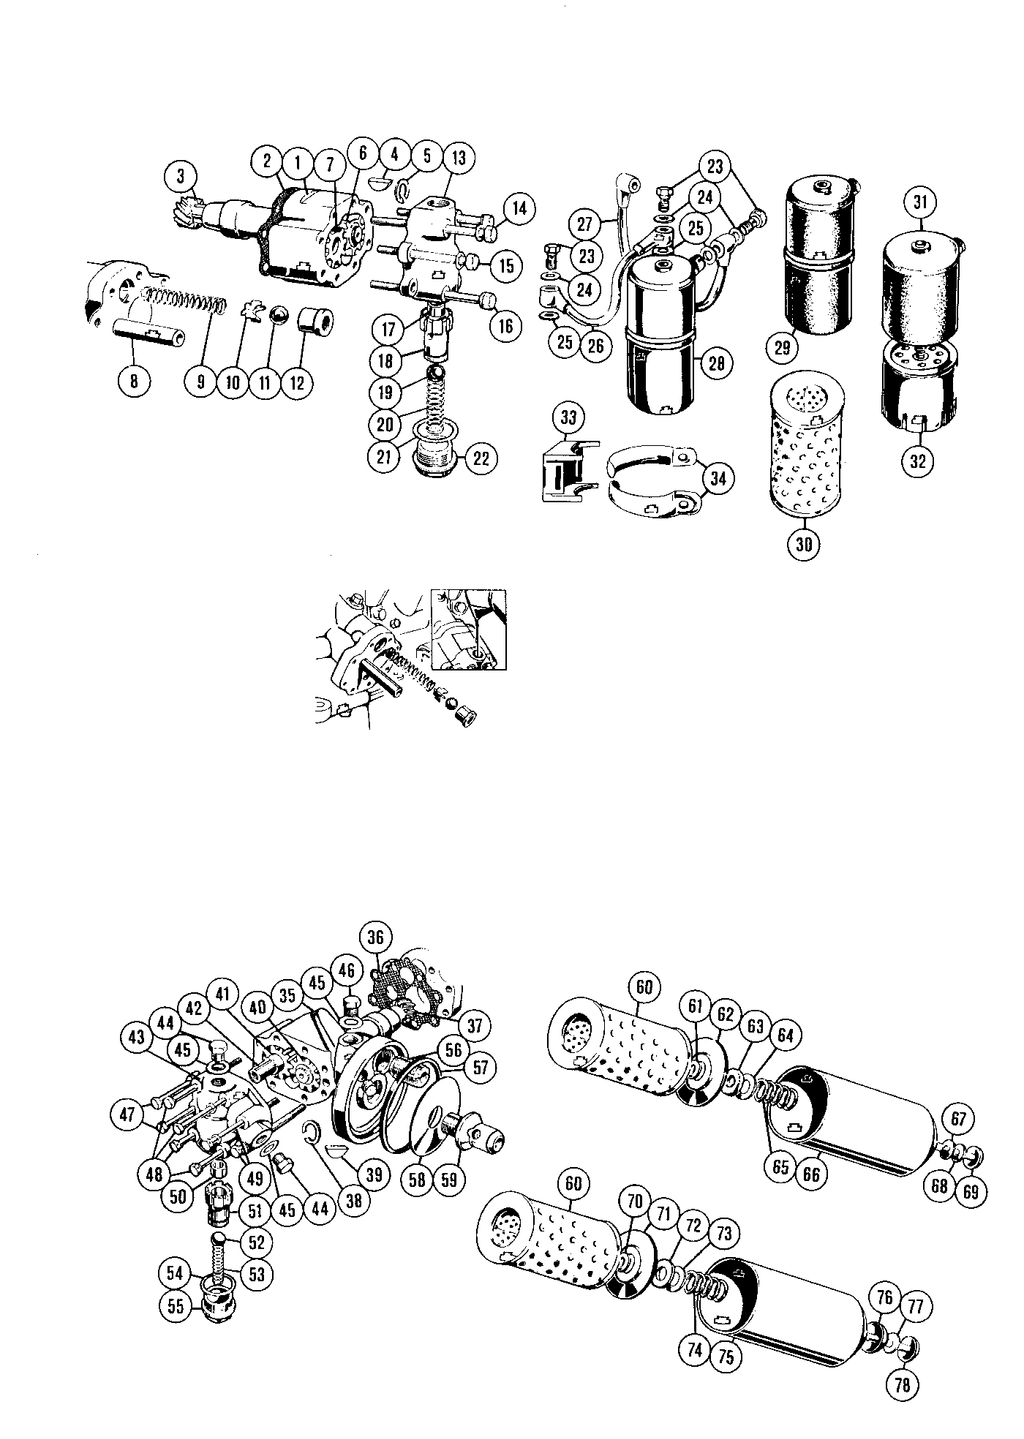 MGTD-TF 1949-1955 - Oil pumps | Webshop Anglo Parts - 1